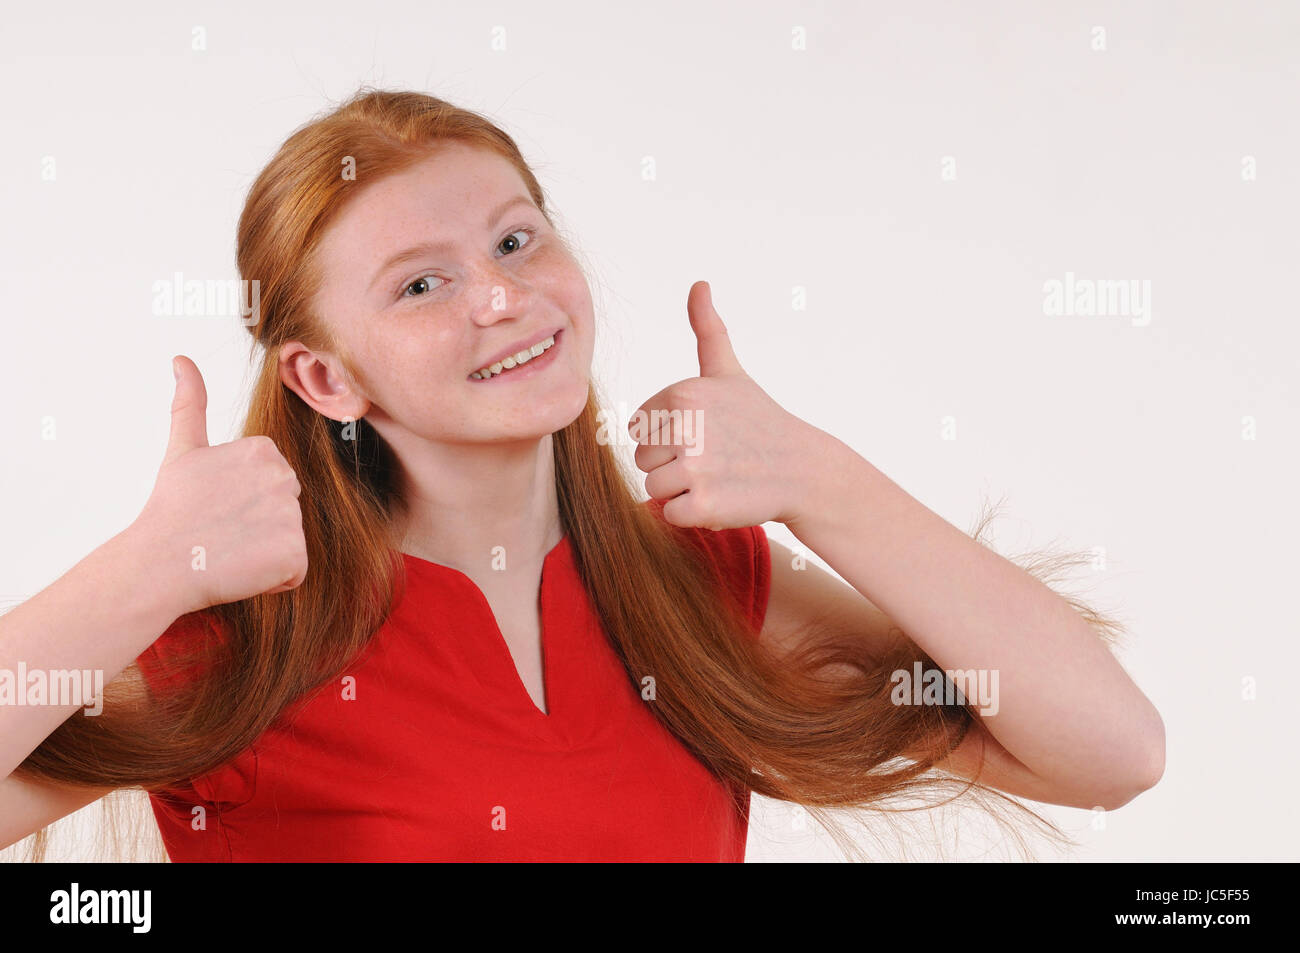 Red hair tennager girl in a red shirt showing a thumbs-up on grey background. Happy smiling lifestyle people concept. Human emotions. Stock Photo